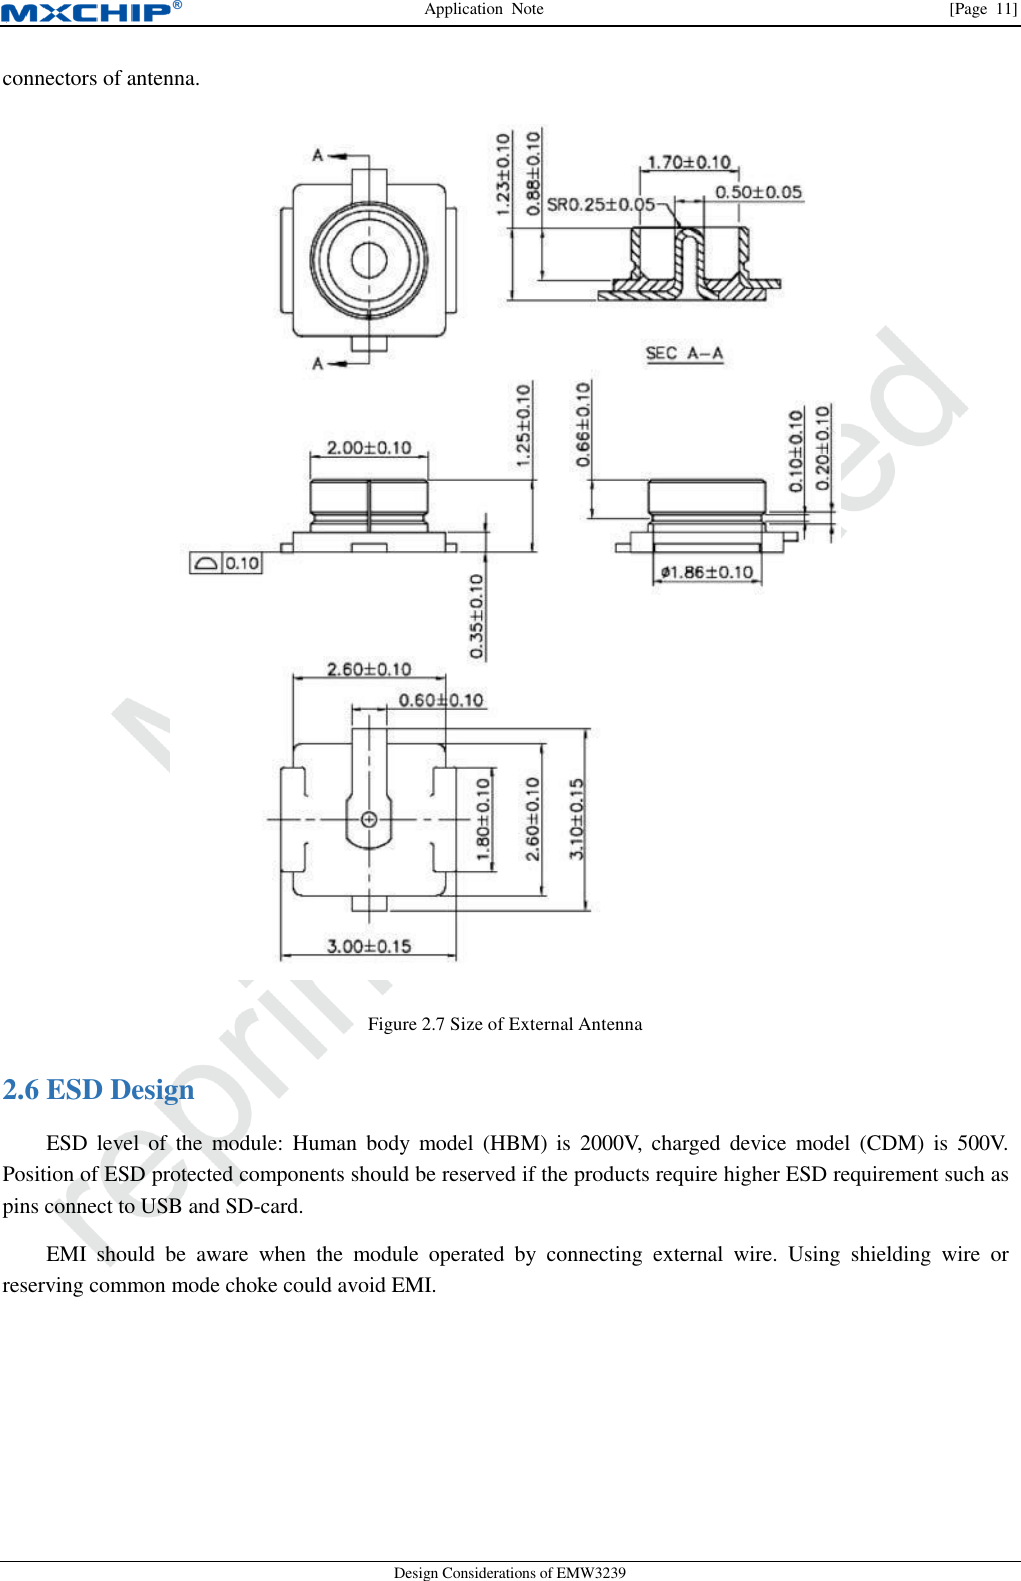 Application  Note                [Page  11] Design Considerations of EMW3239 connectors of antenna.  Figure 2.7 Size of External Antenna  ESD Design 2.6ESD  level  of  the  module:  Human  body  model  (HBM)  is  2000V,  charged  device  model  (CDM)  is  500V. Position of ESD protected components should be reserved if the products require higher ESD requirement such as pins connect to USB and SD-card. EMI  should  be  aware  when  the  module  operated  by  connecting  external  wire.  Using  shielding  wire  or reserving common mode choke could avoid EMI. 